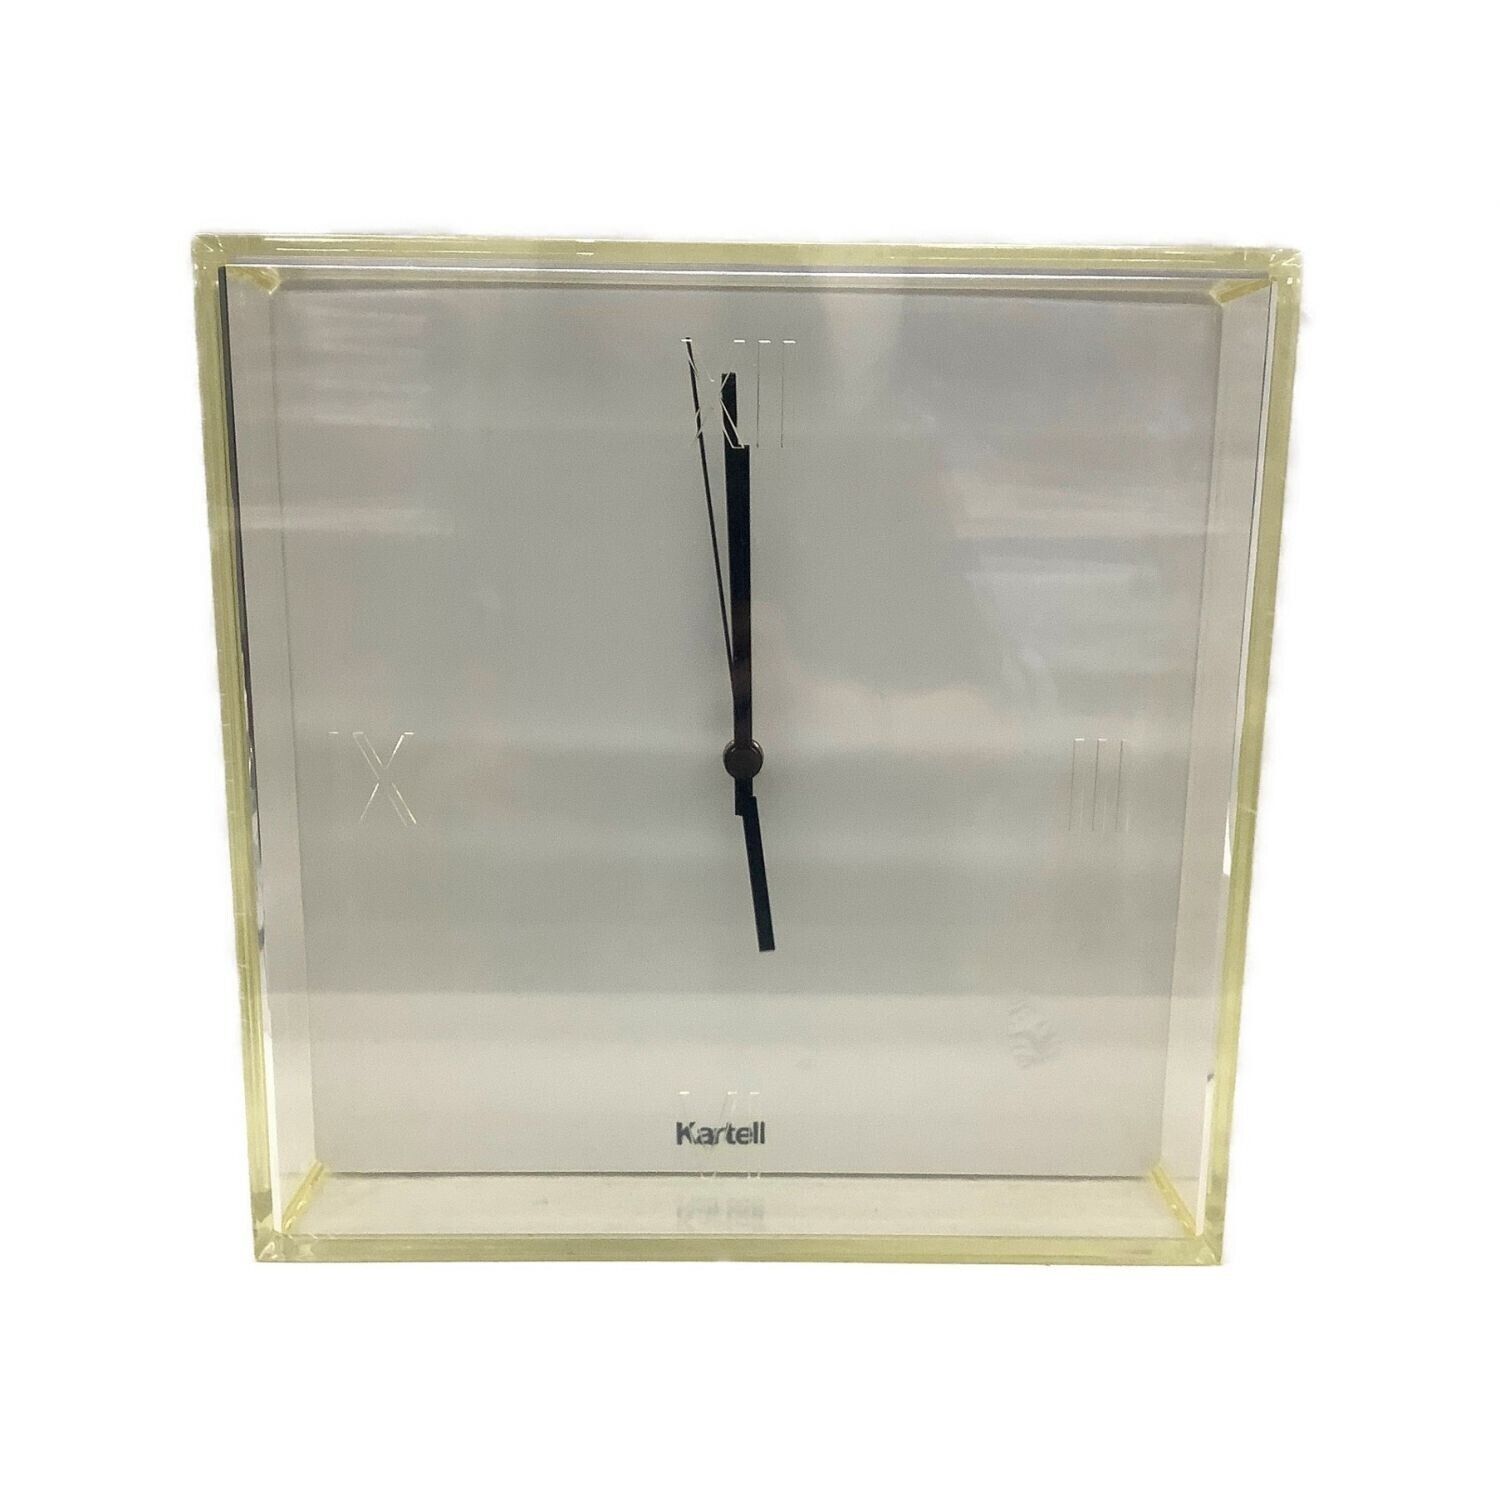 Kartell Tic Tac Clock Modern MCM Acrylic Lucite Philippe Starck Italy